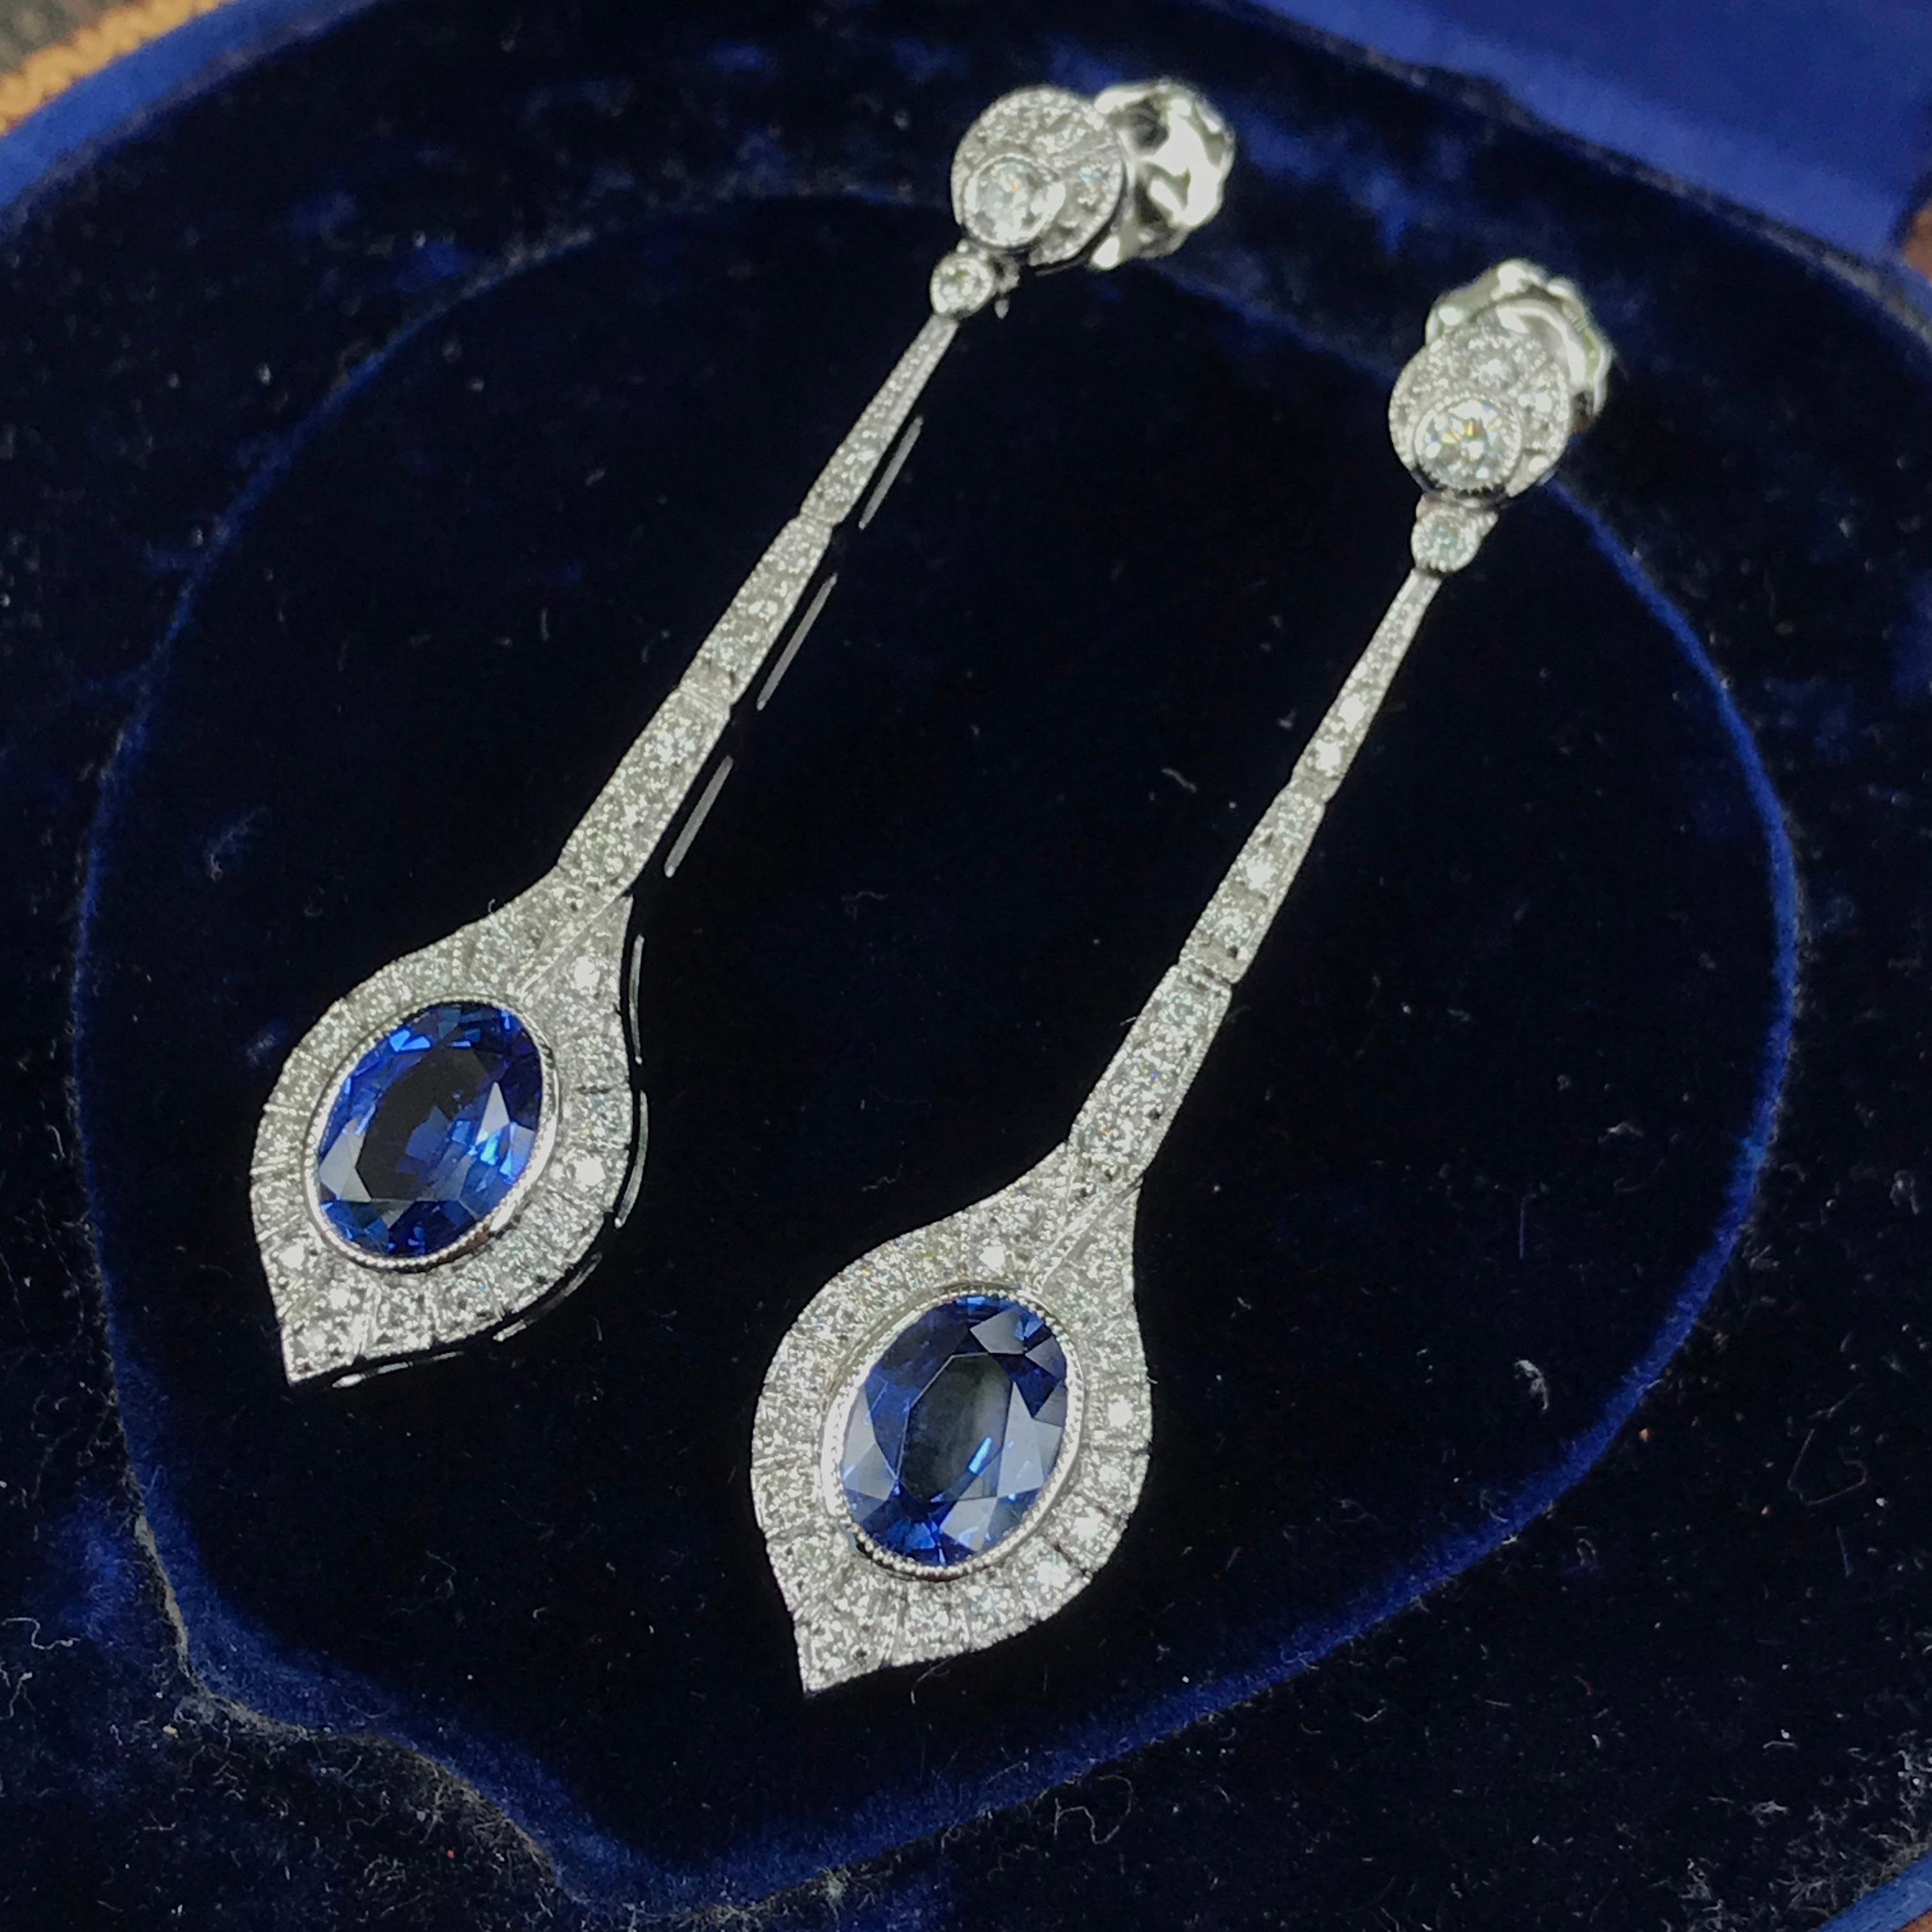 A lovely pair of long Art Deco design earrings that drop two natural cushion shape Ceylon sapphires with a total approximate gemstone weight of 3.7 carats. The earrings have an accent and line of sparkling diamonds.

Information
Metal: 18K White